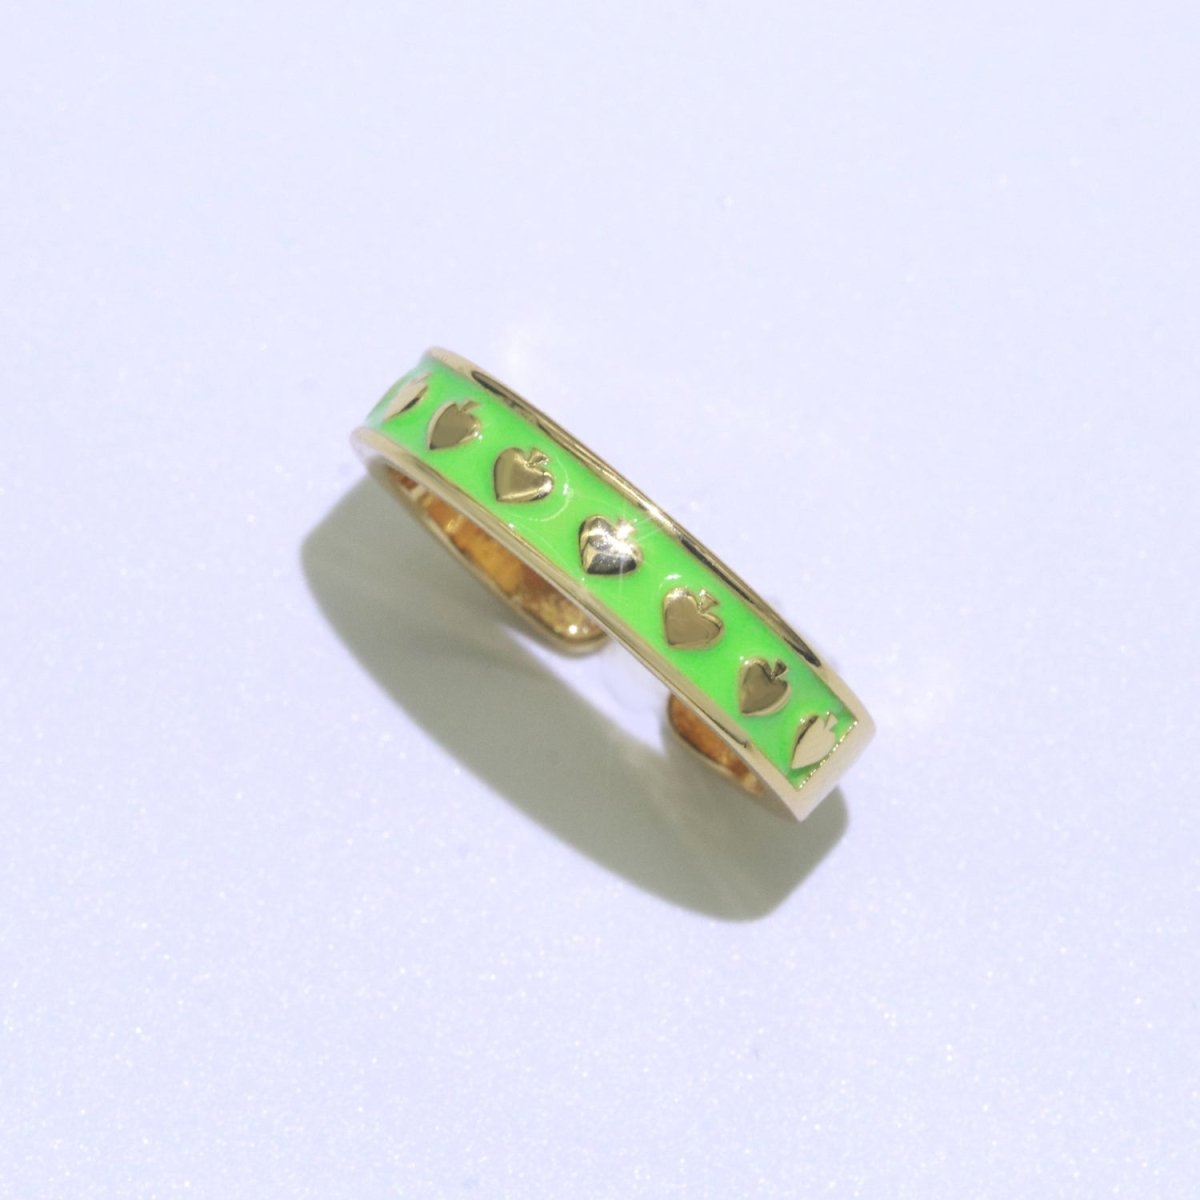 1x Dainty Colorful Enamel Ring Multicolor Enamel Band Spade Ring Stacking Open Ring Adjustable Ring Yellow Teal Pink Green White Neon Ring O-395 ~ O-402 - DLUXCA